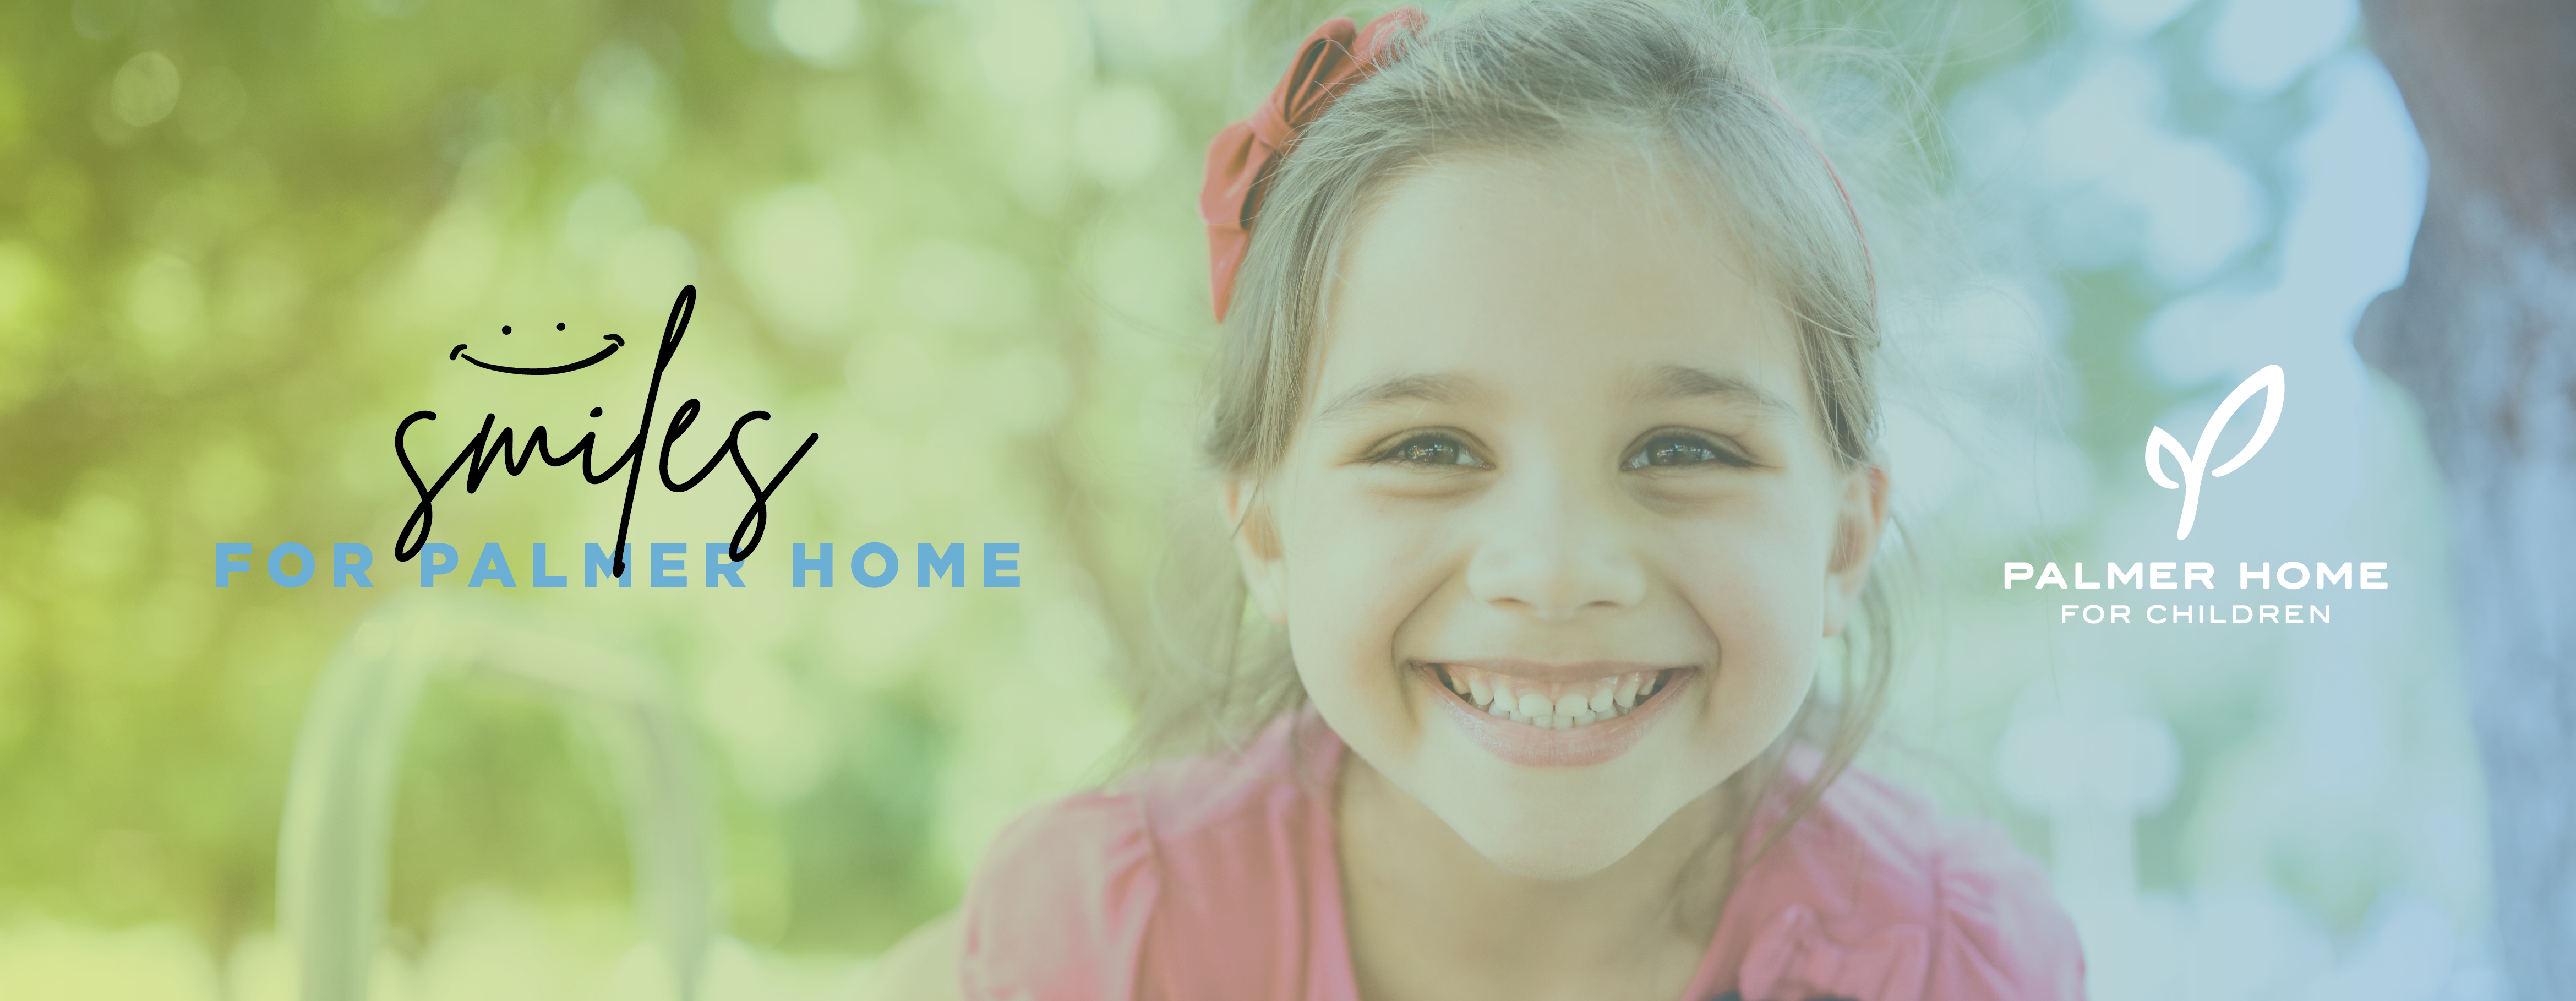 young girl smiling with smiles for palmer home logo